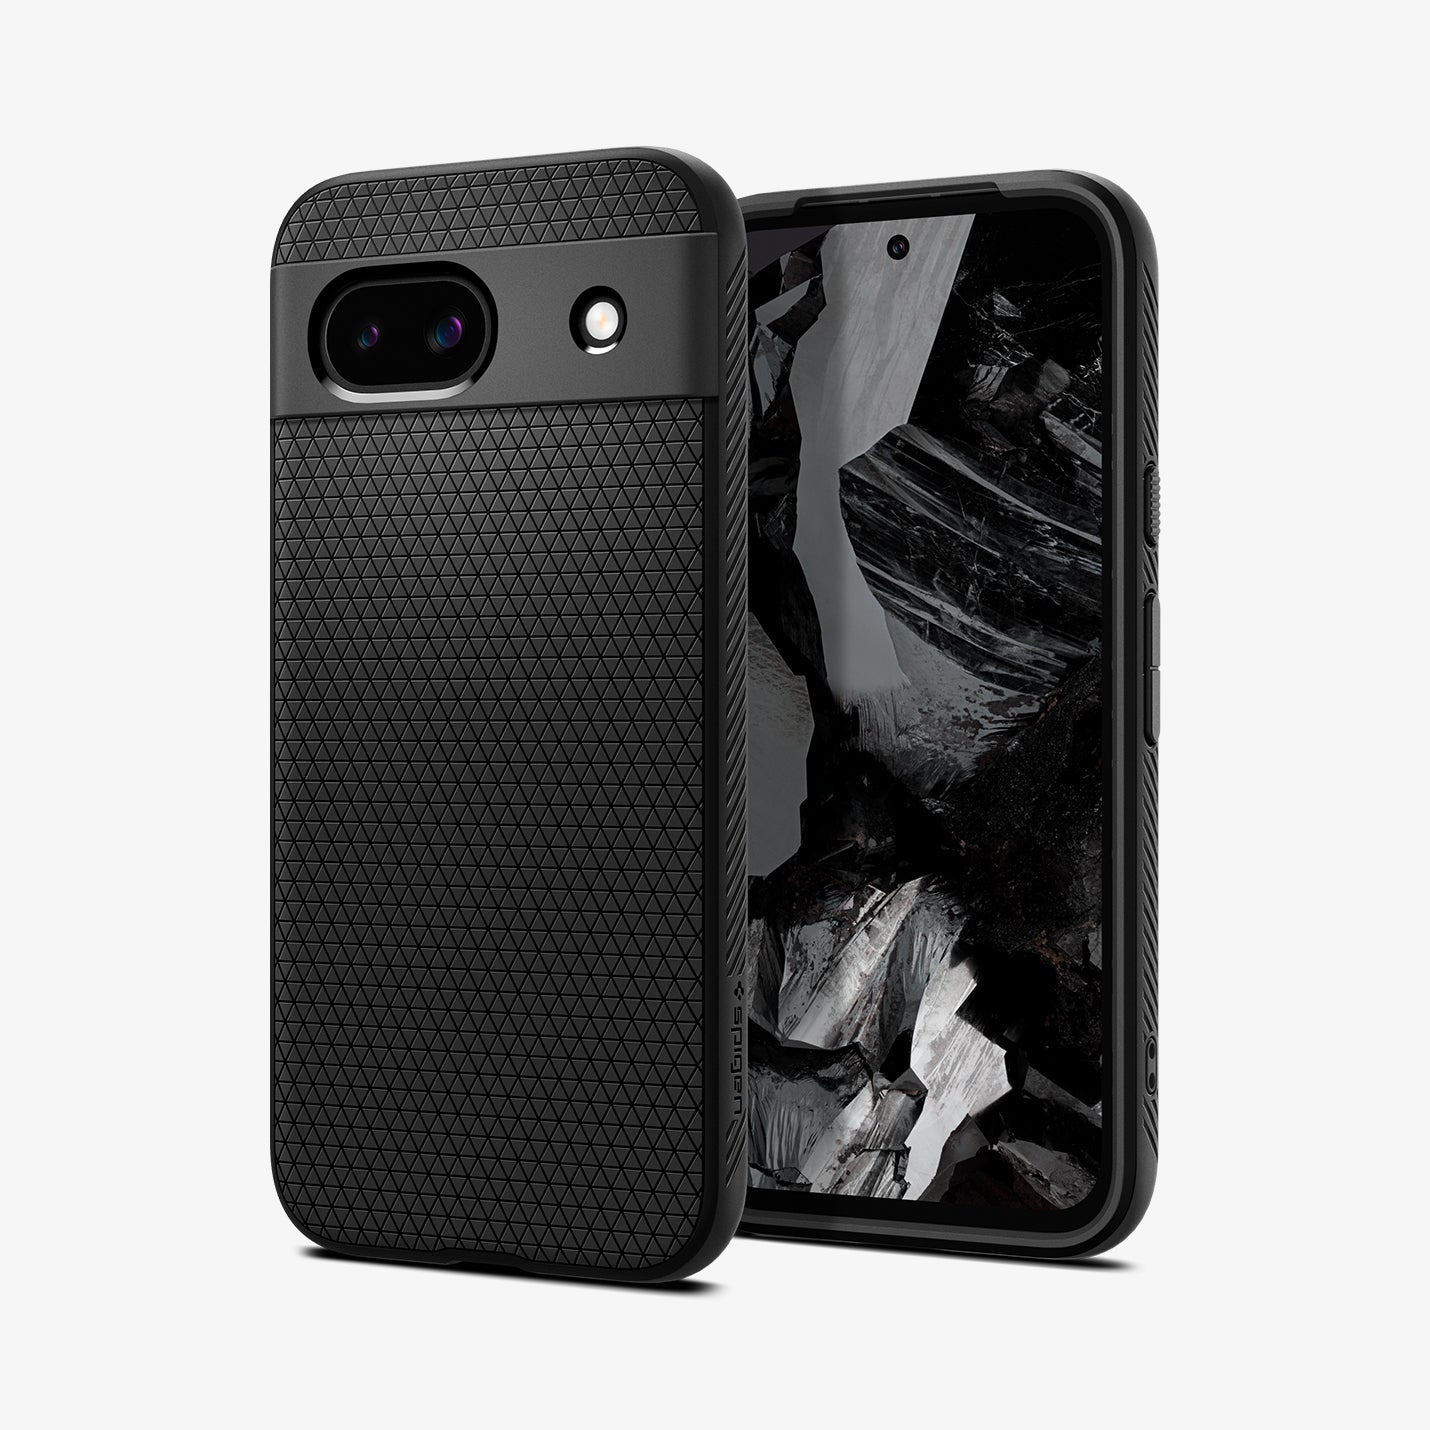 ACS07257 - Pixel 8a Case Liquid Air in Matte Black showing the back, partial front and sides